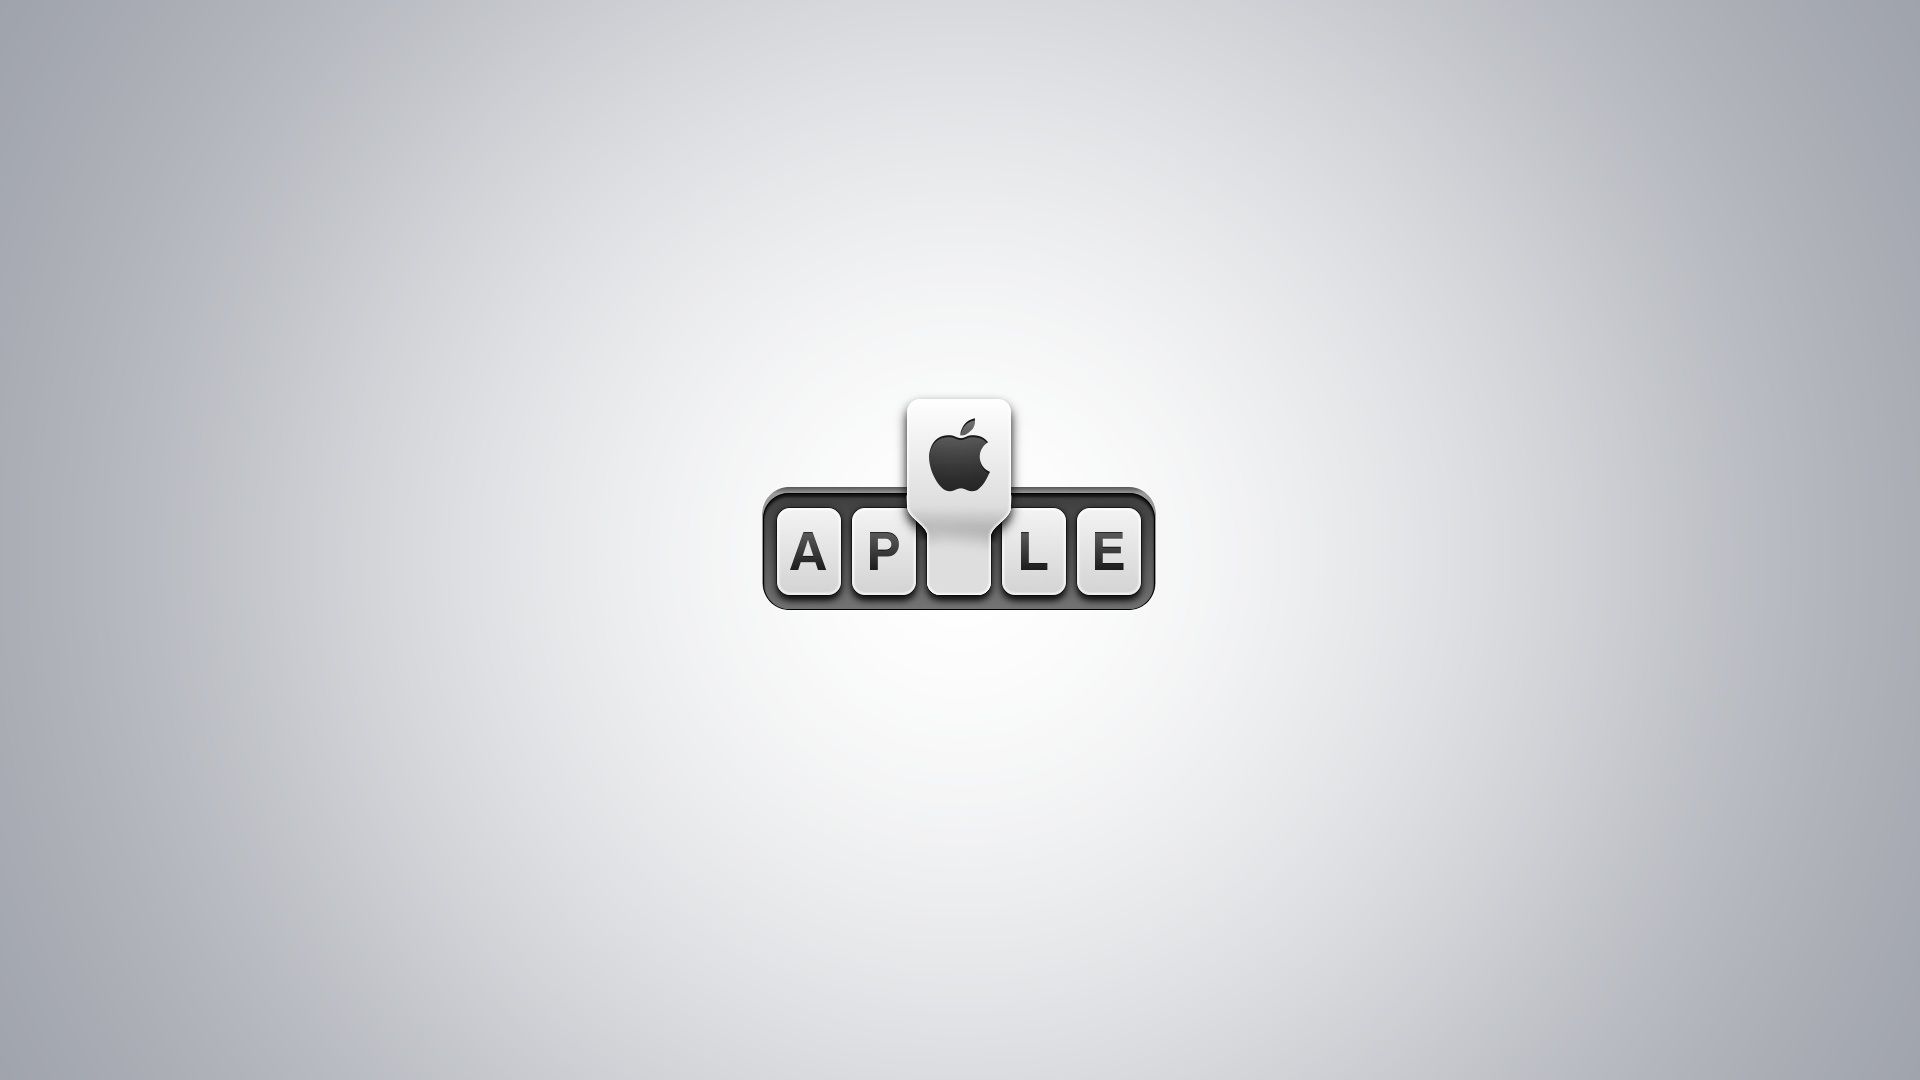 Apple Desktop Wallpapers HD Everything iDevice